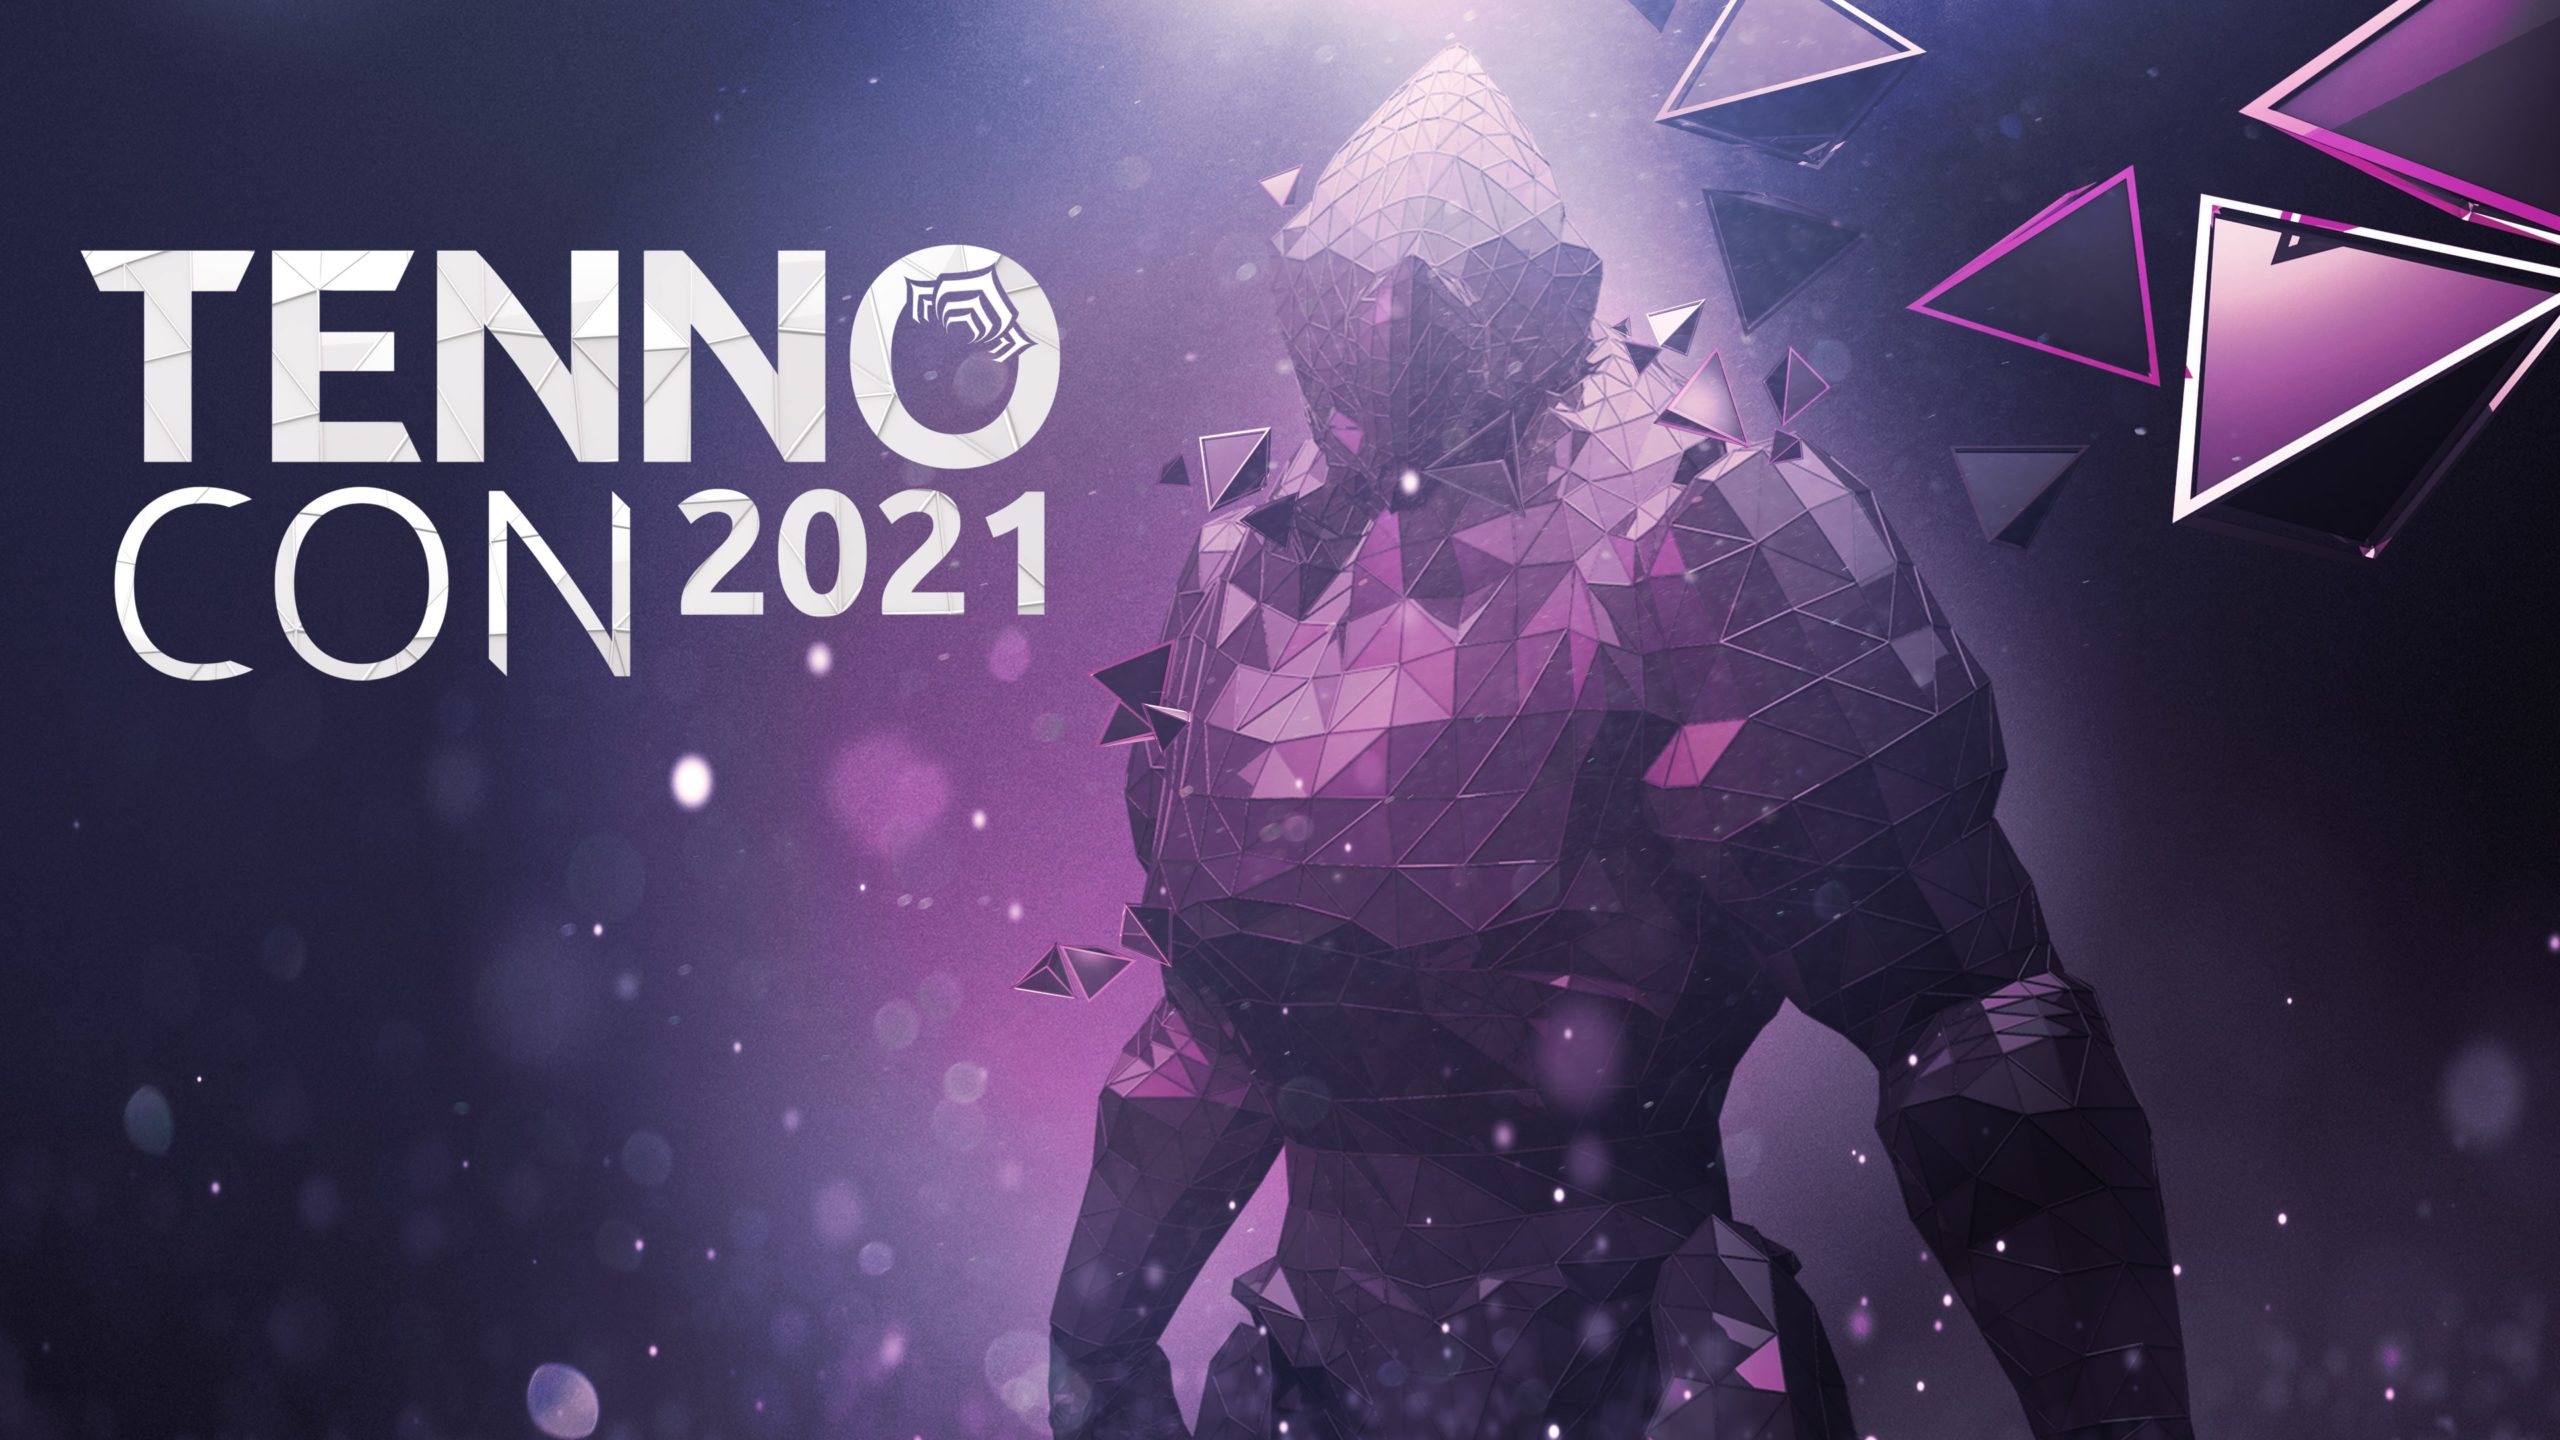 TennoCon 2021 virtual event schedule has been revealed